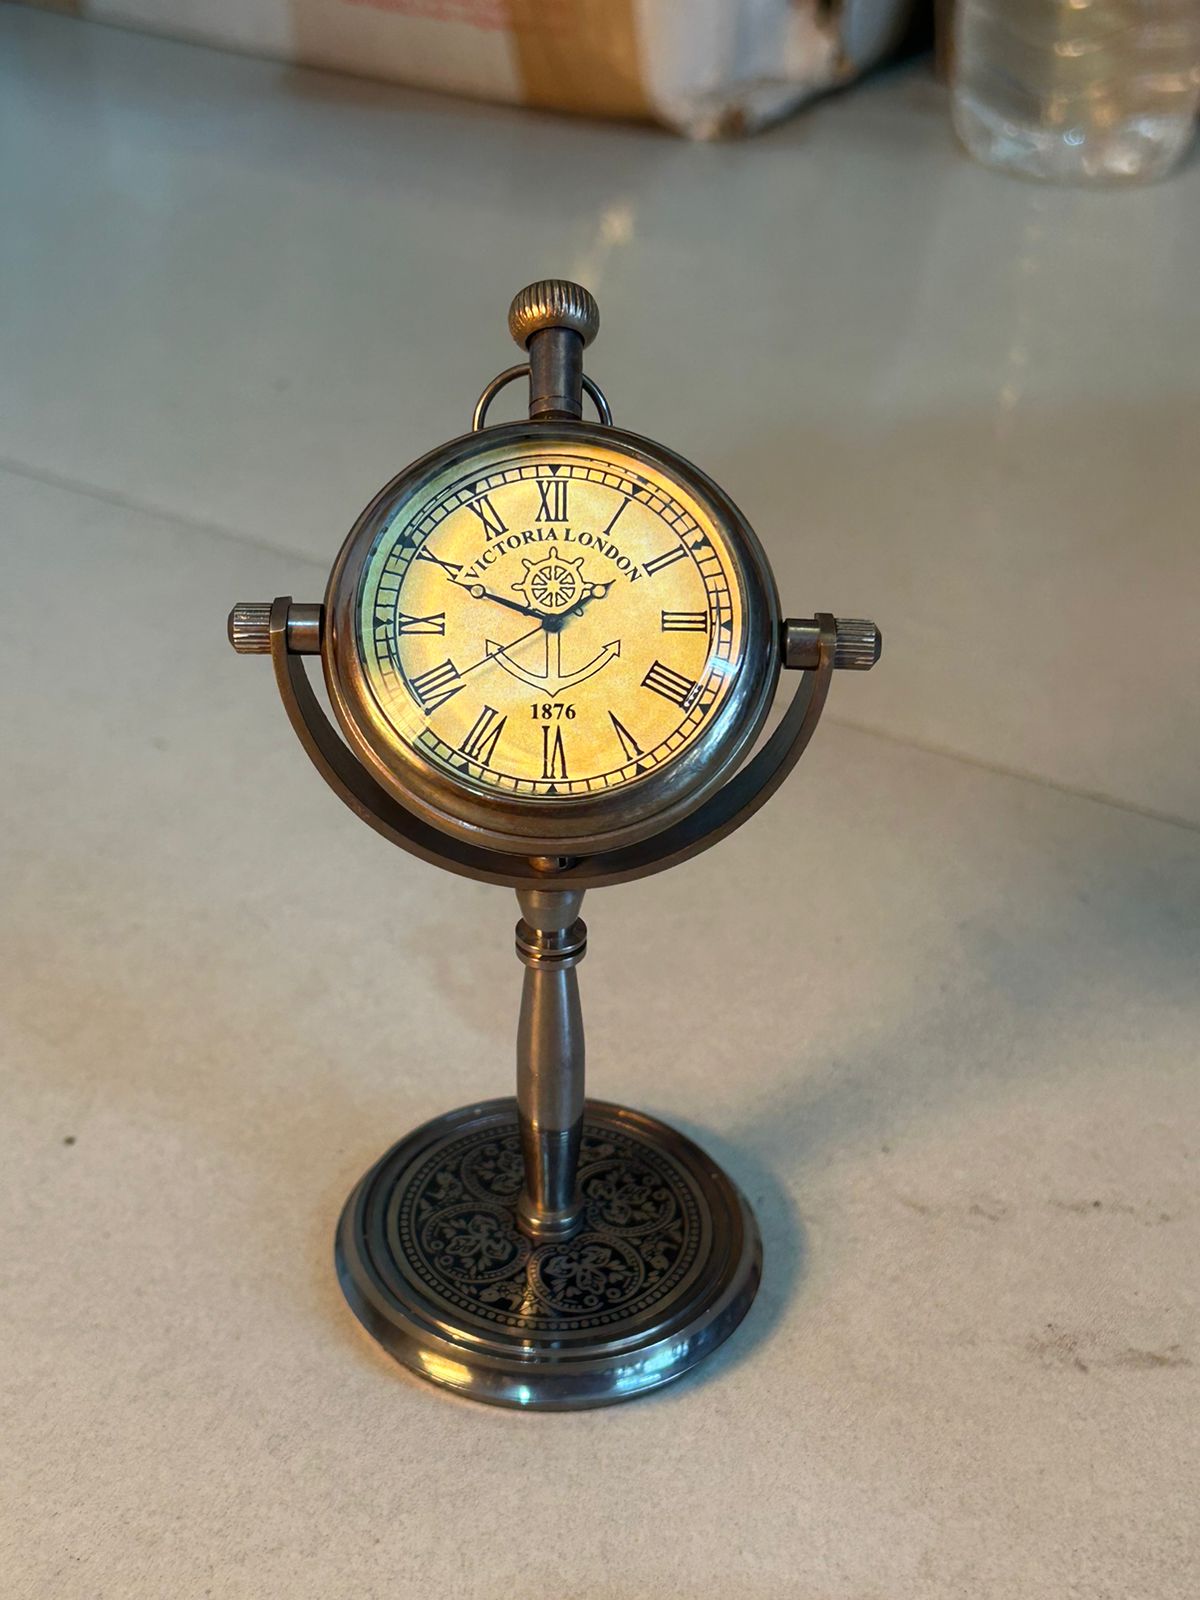 Antique Victoria London Table Clock for Office & Home Decor